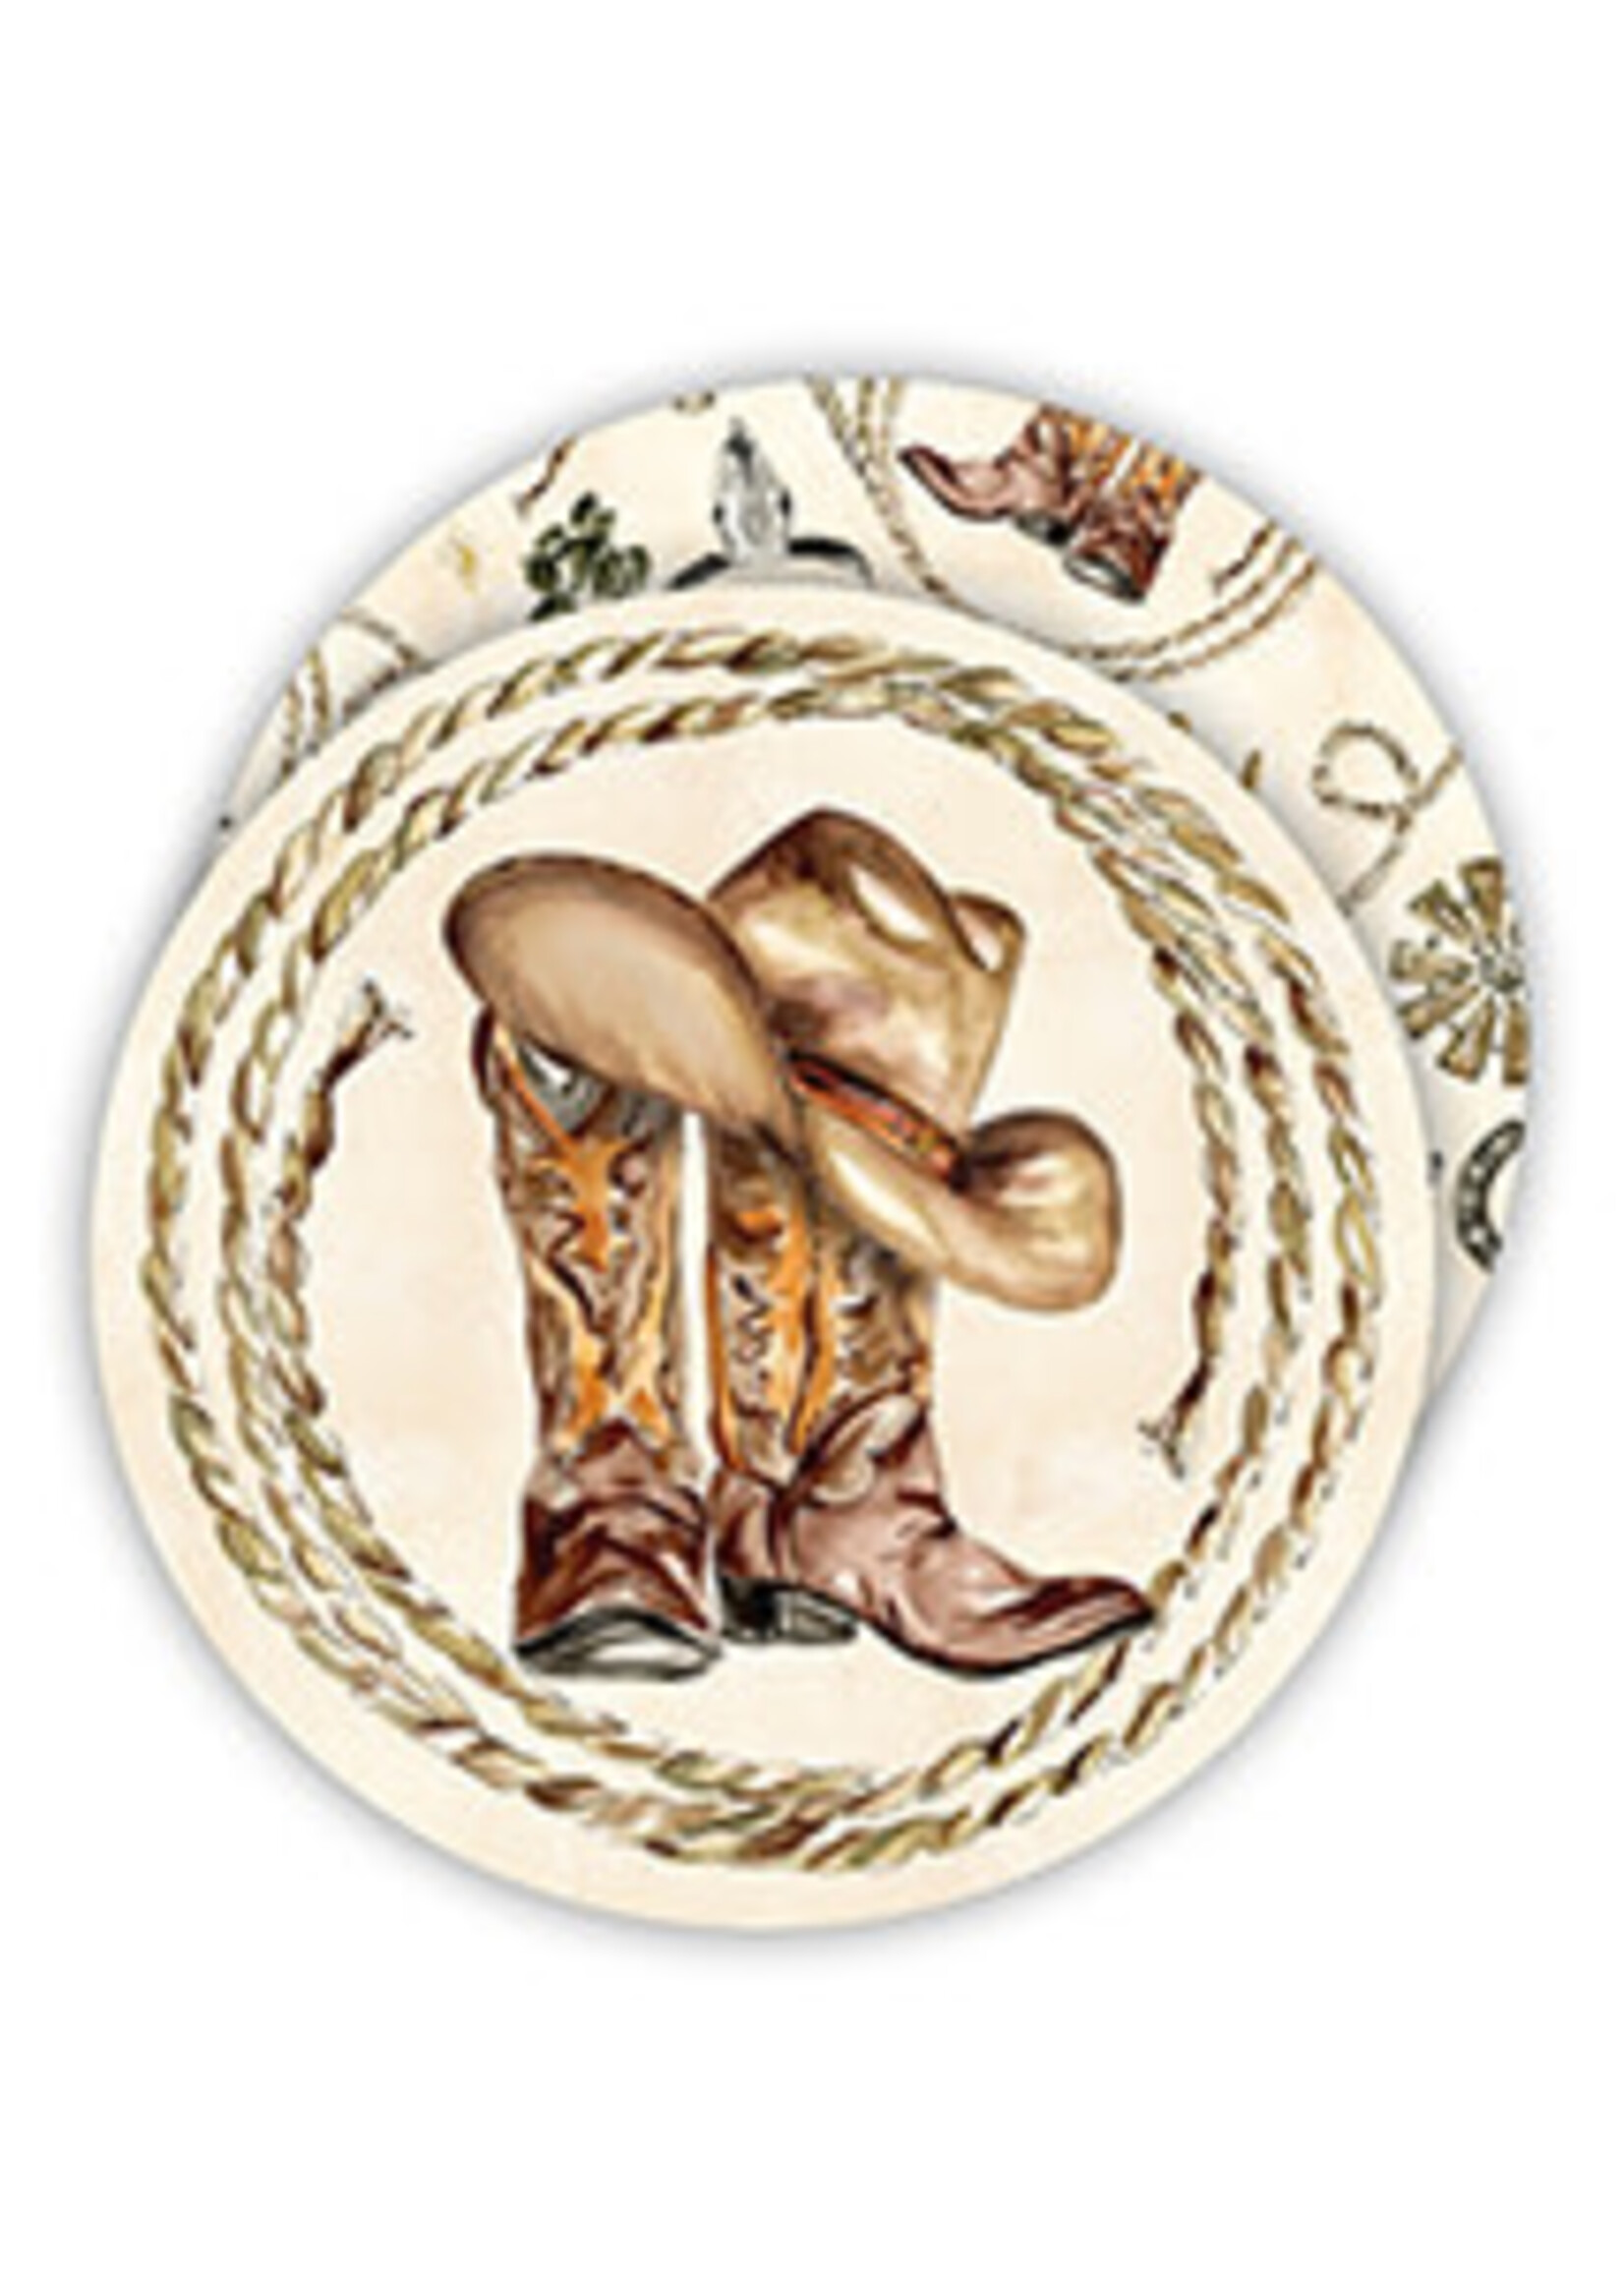 Rosanne Beck Rnd Coaster Western Boots and Hat Icons 035-0251